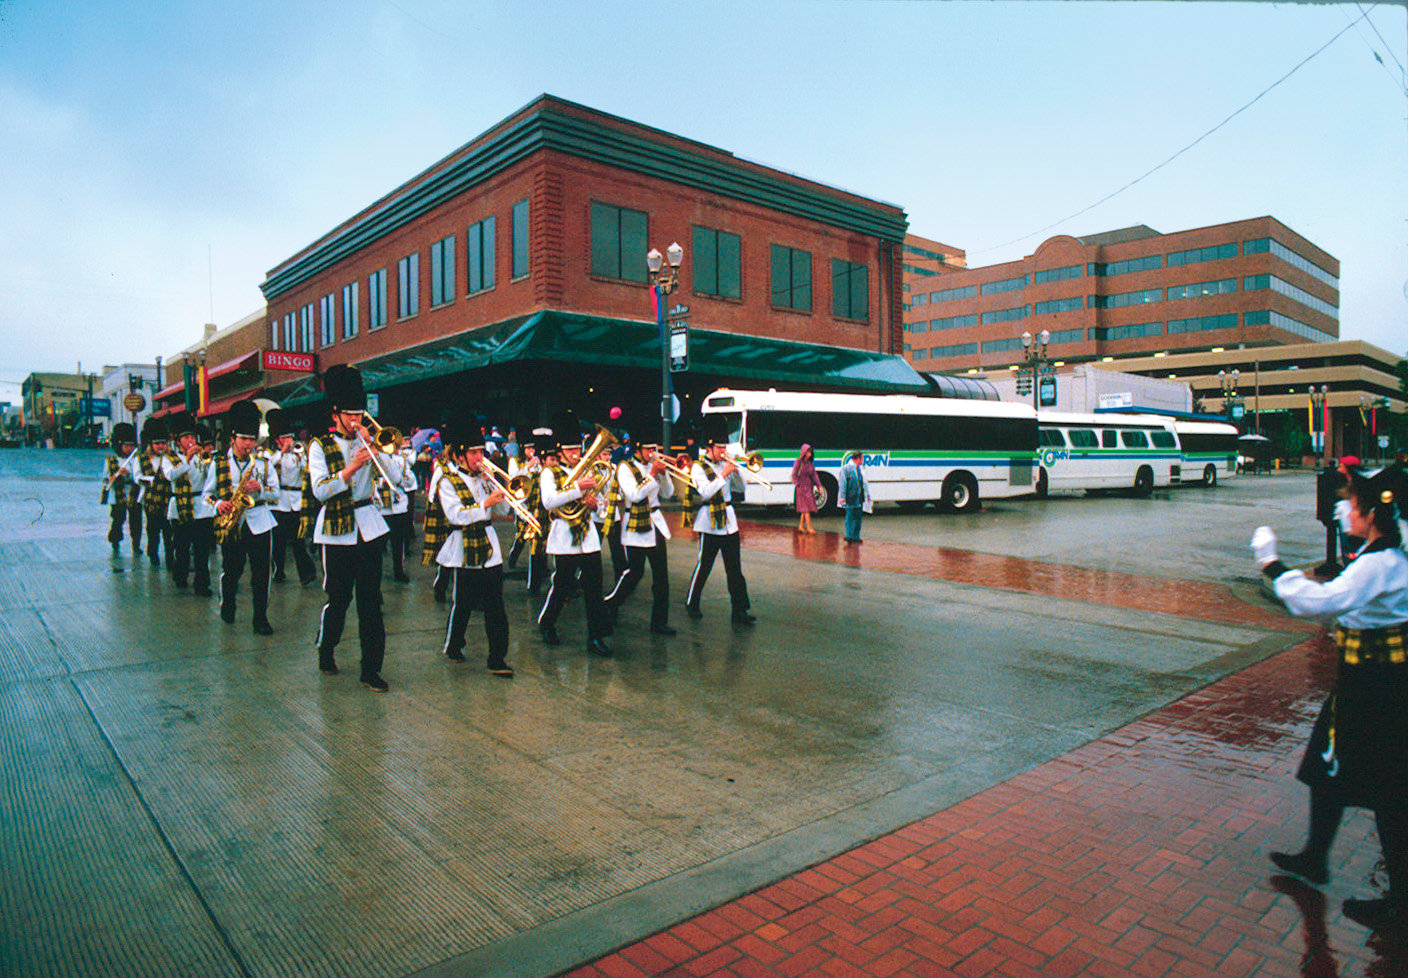 Band members play for a parade marking the opening of the Seventh Street Transit Center in 1984.